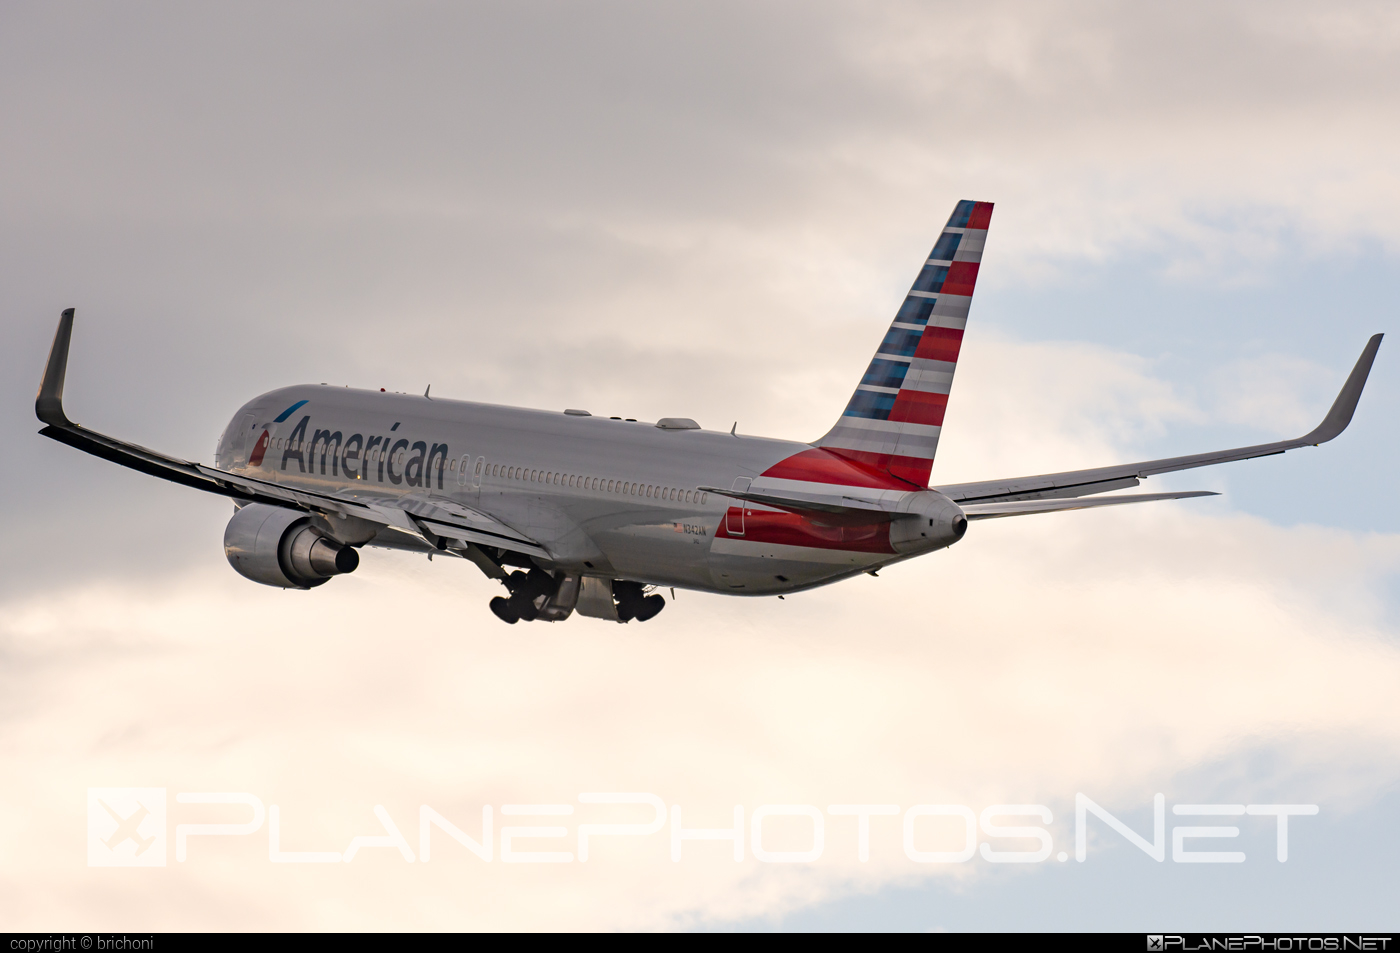 Boeing 767-300ER - N342AN operated by American Airlines #americanairlines #b767 #b767er #boeing #boeing767